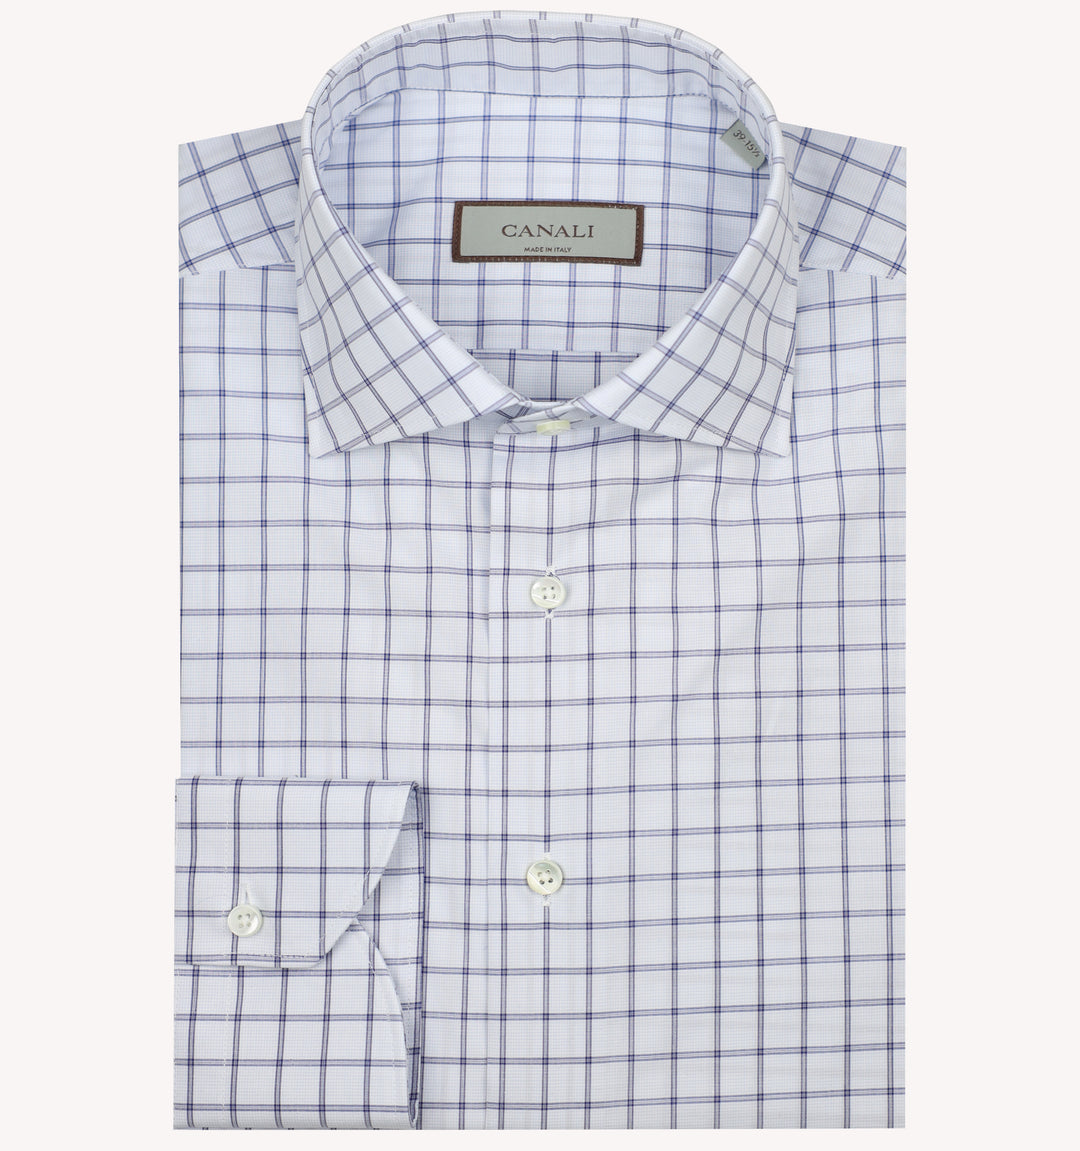 Canali Check Dress Shirt in Blue